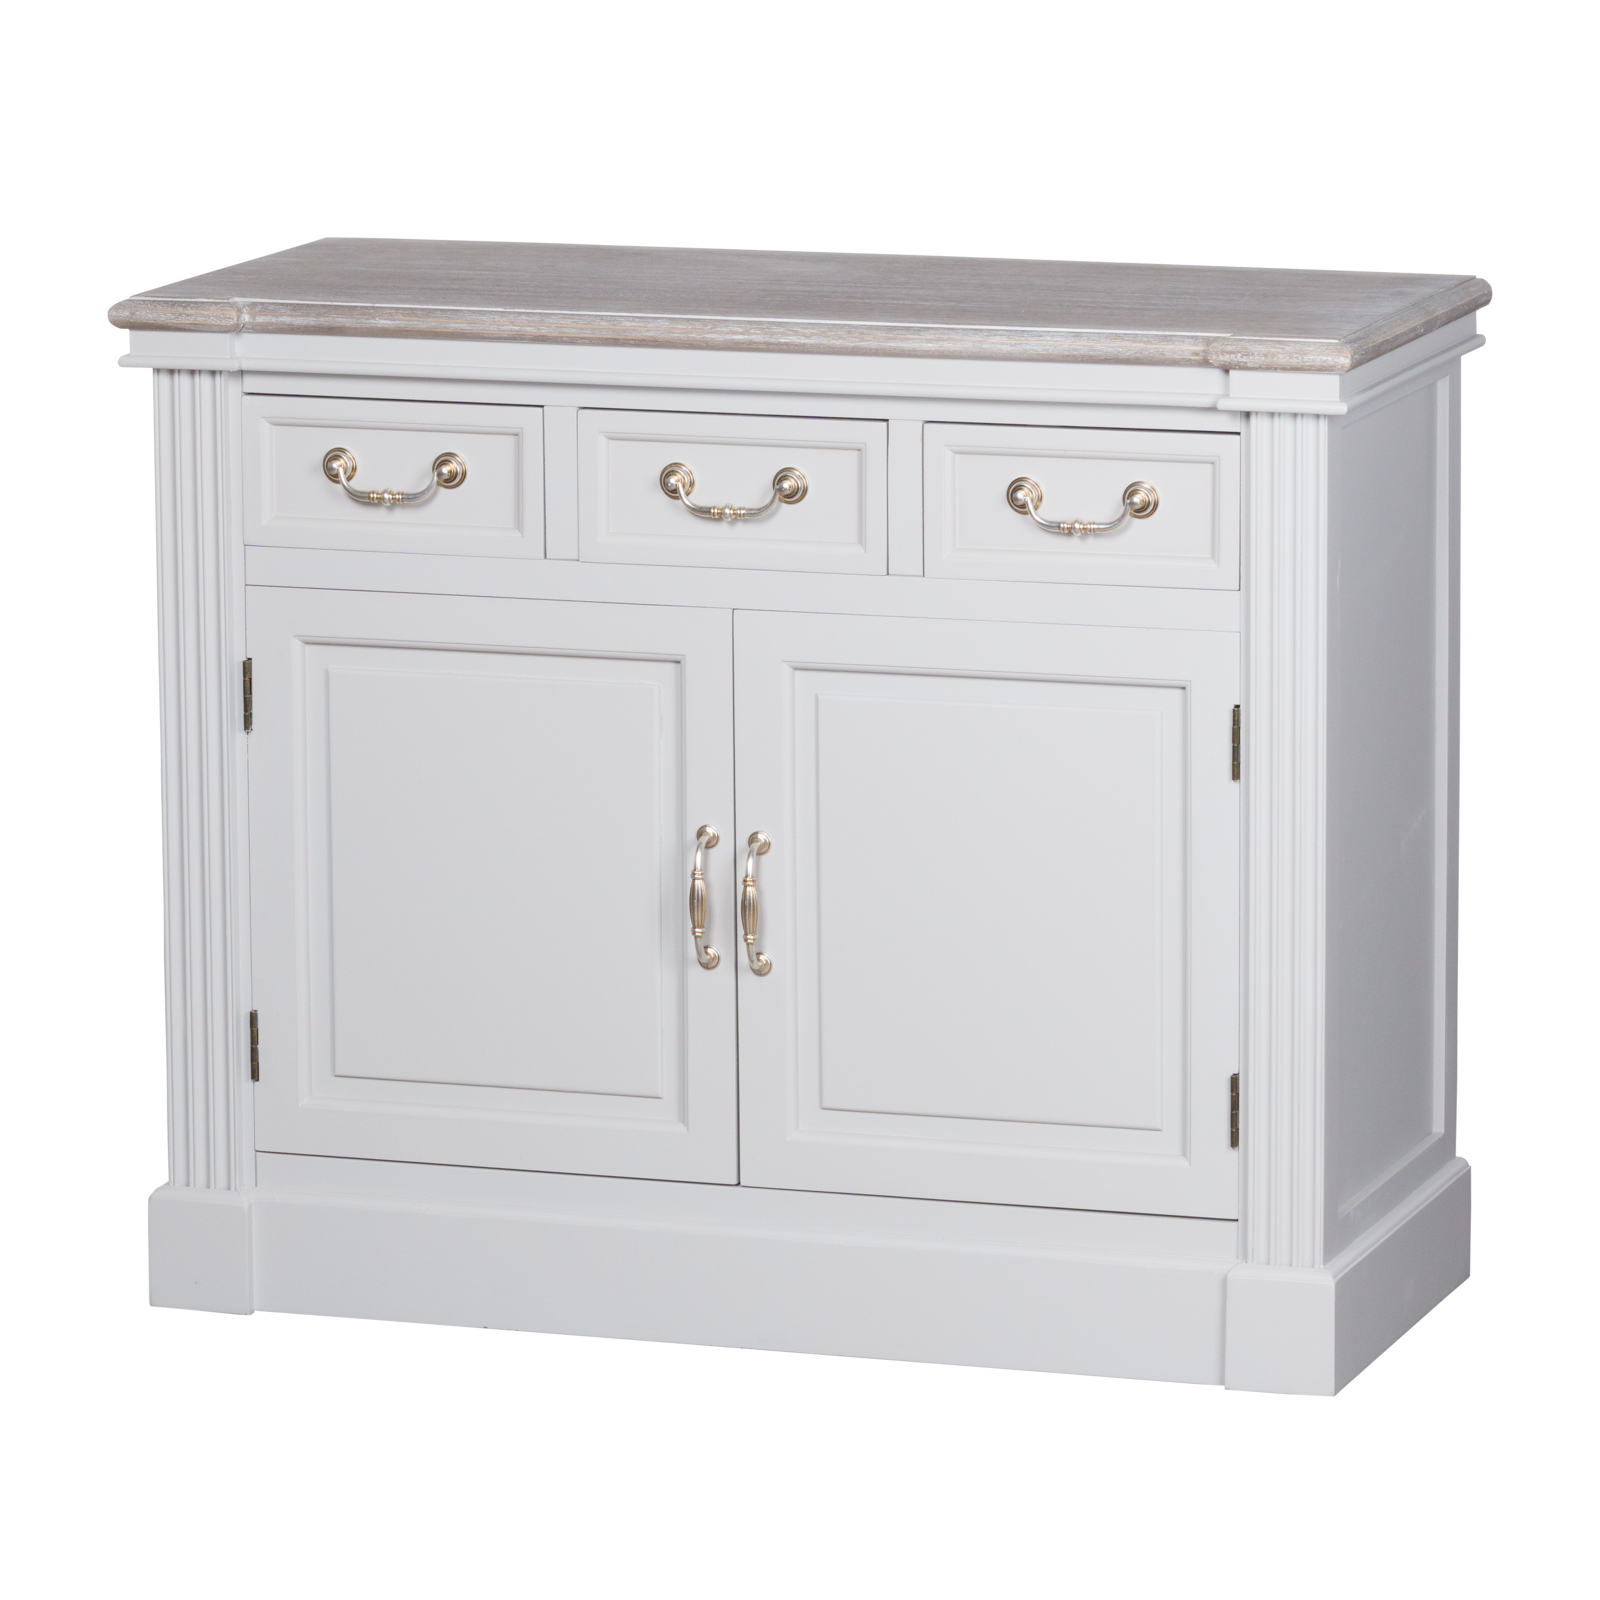 The Liberty Collection Three Drawer Two Door Cupboard